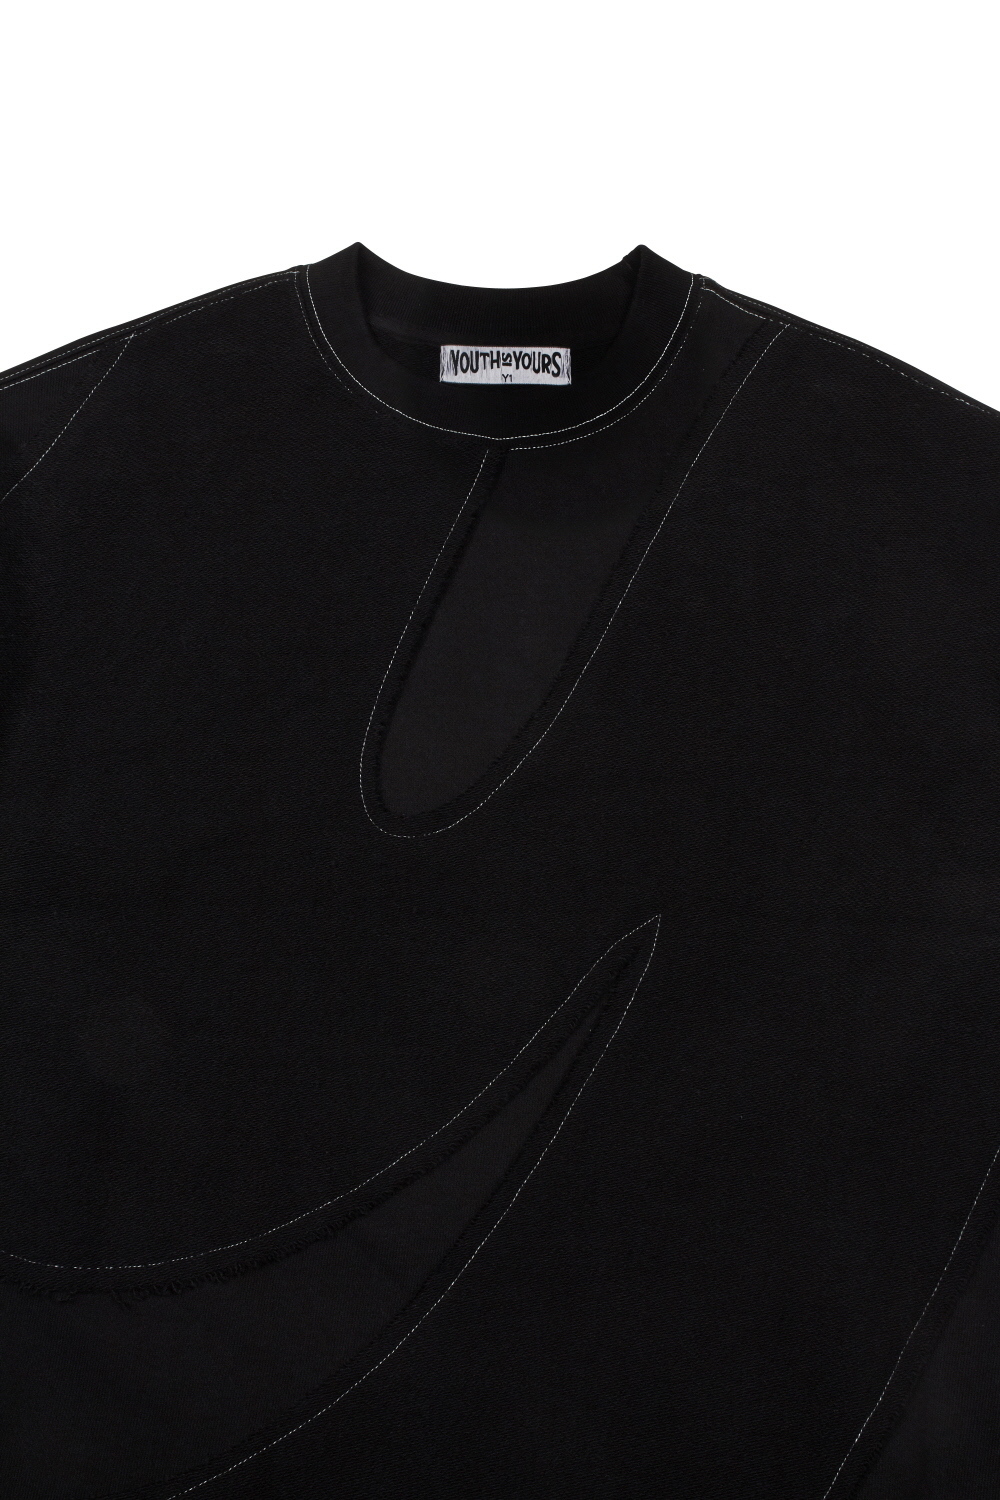 long sleeved tee detail image-S17L5